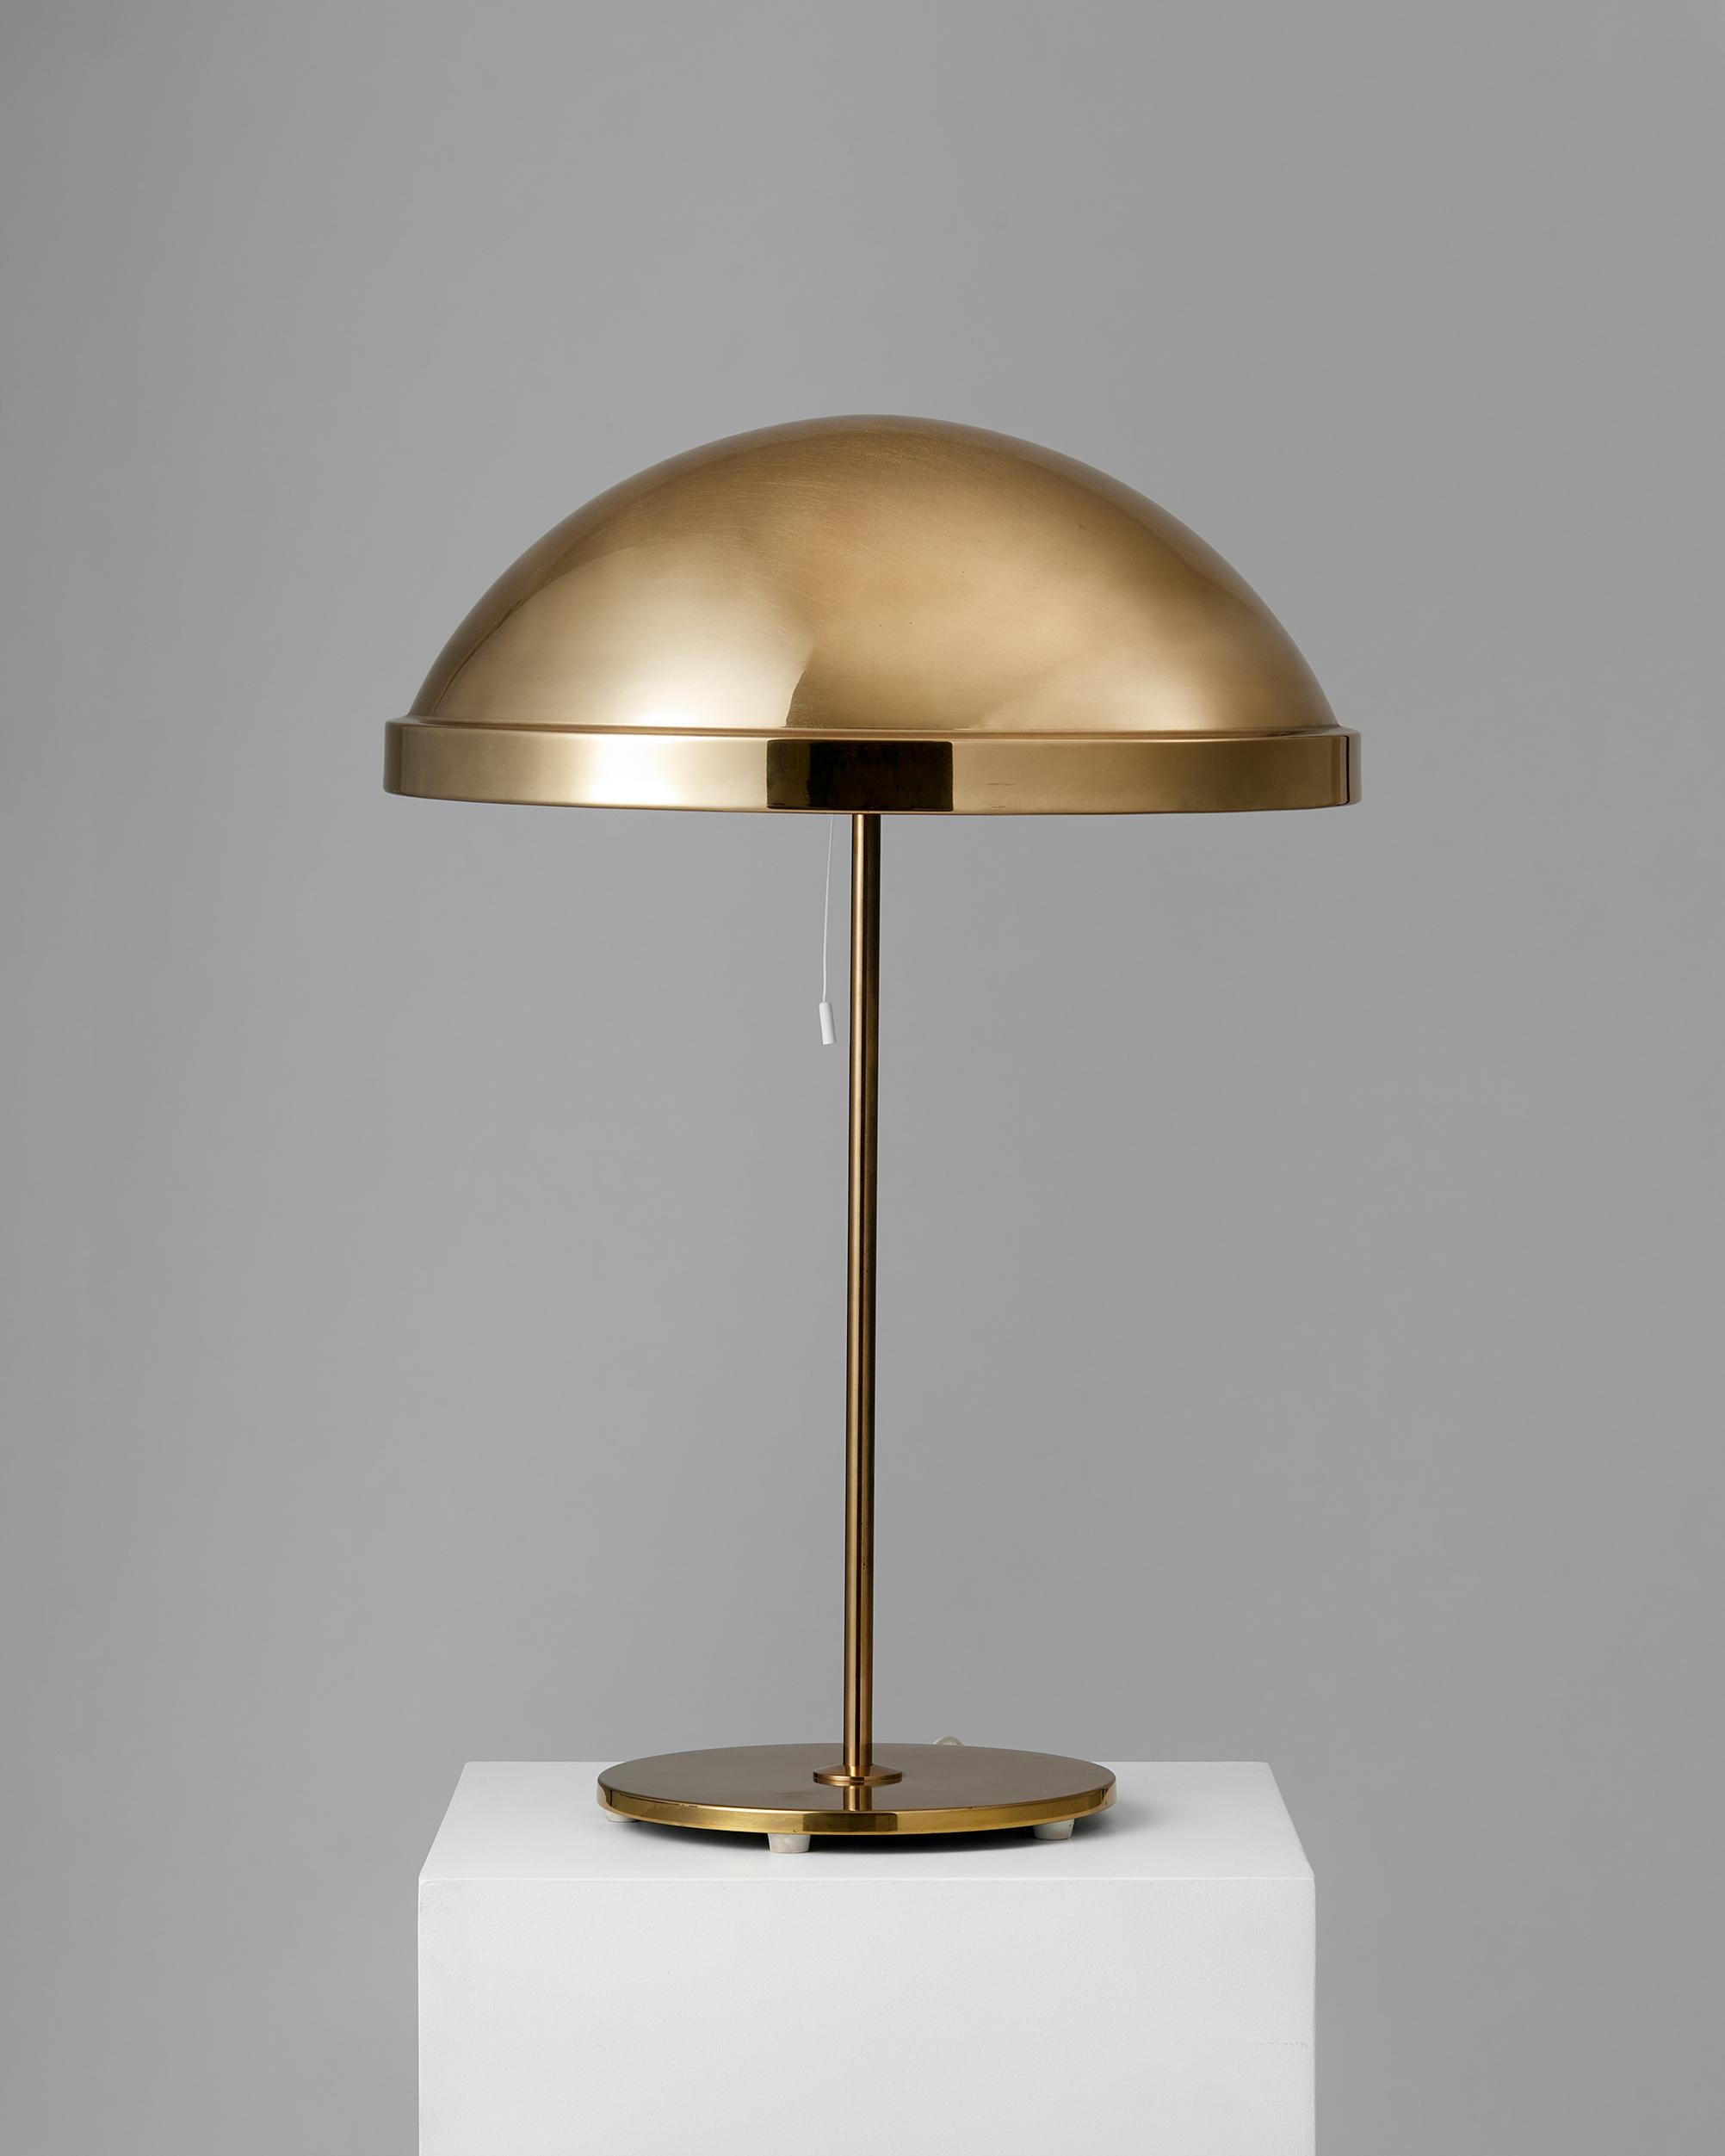 Table lamp, anonymous for Bergboms.
Sweden, 1960s.

Brass.

Stamped.

Total height: 70 cm
Height of the shade: 19 cm
Diameter of the shade: 43 cm
Diameter of the base: 23 cm.